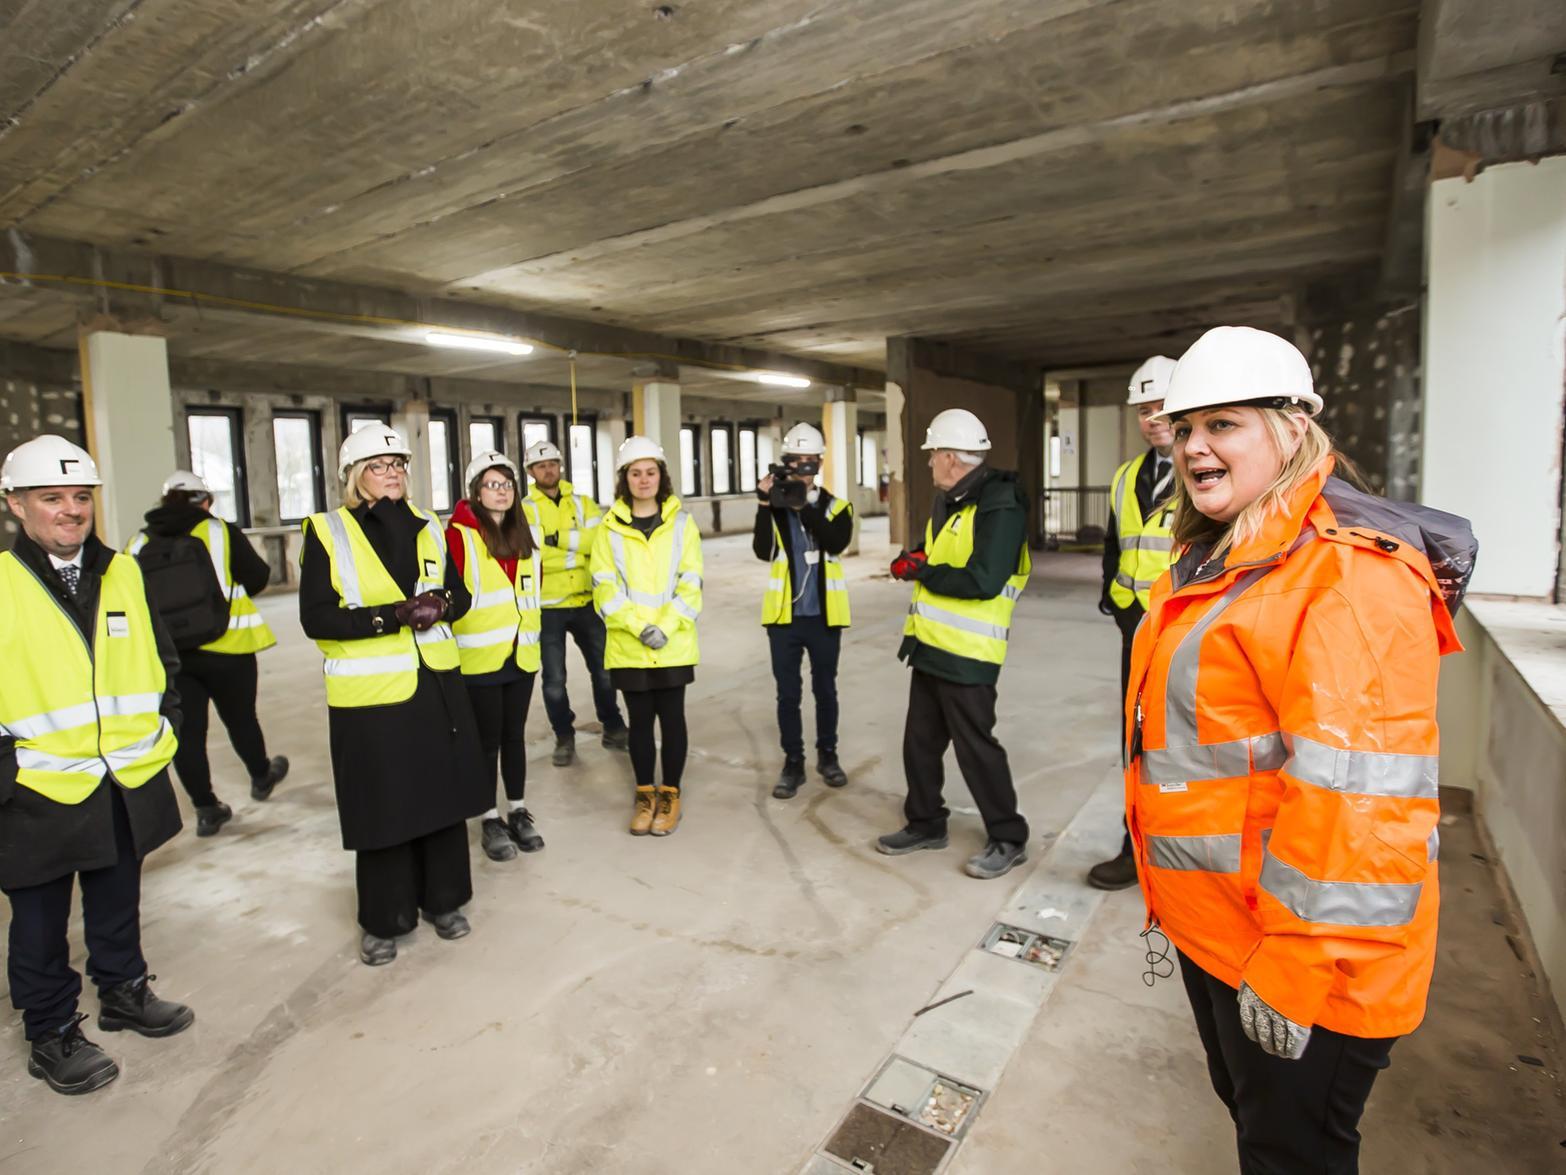 The sixth form centre is being jointly developed by Calderdale Council, Trinity Multi-Academy Trust and Rastrick High School in the former Halifax Central Library.